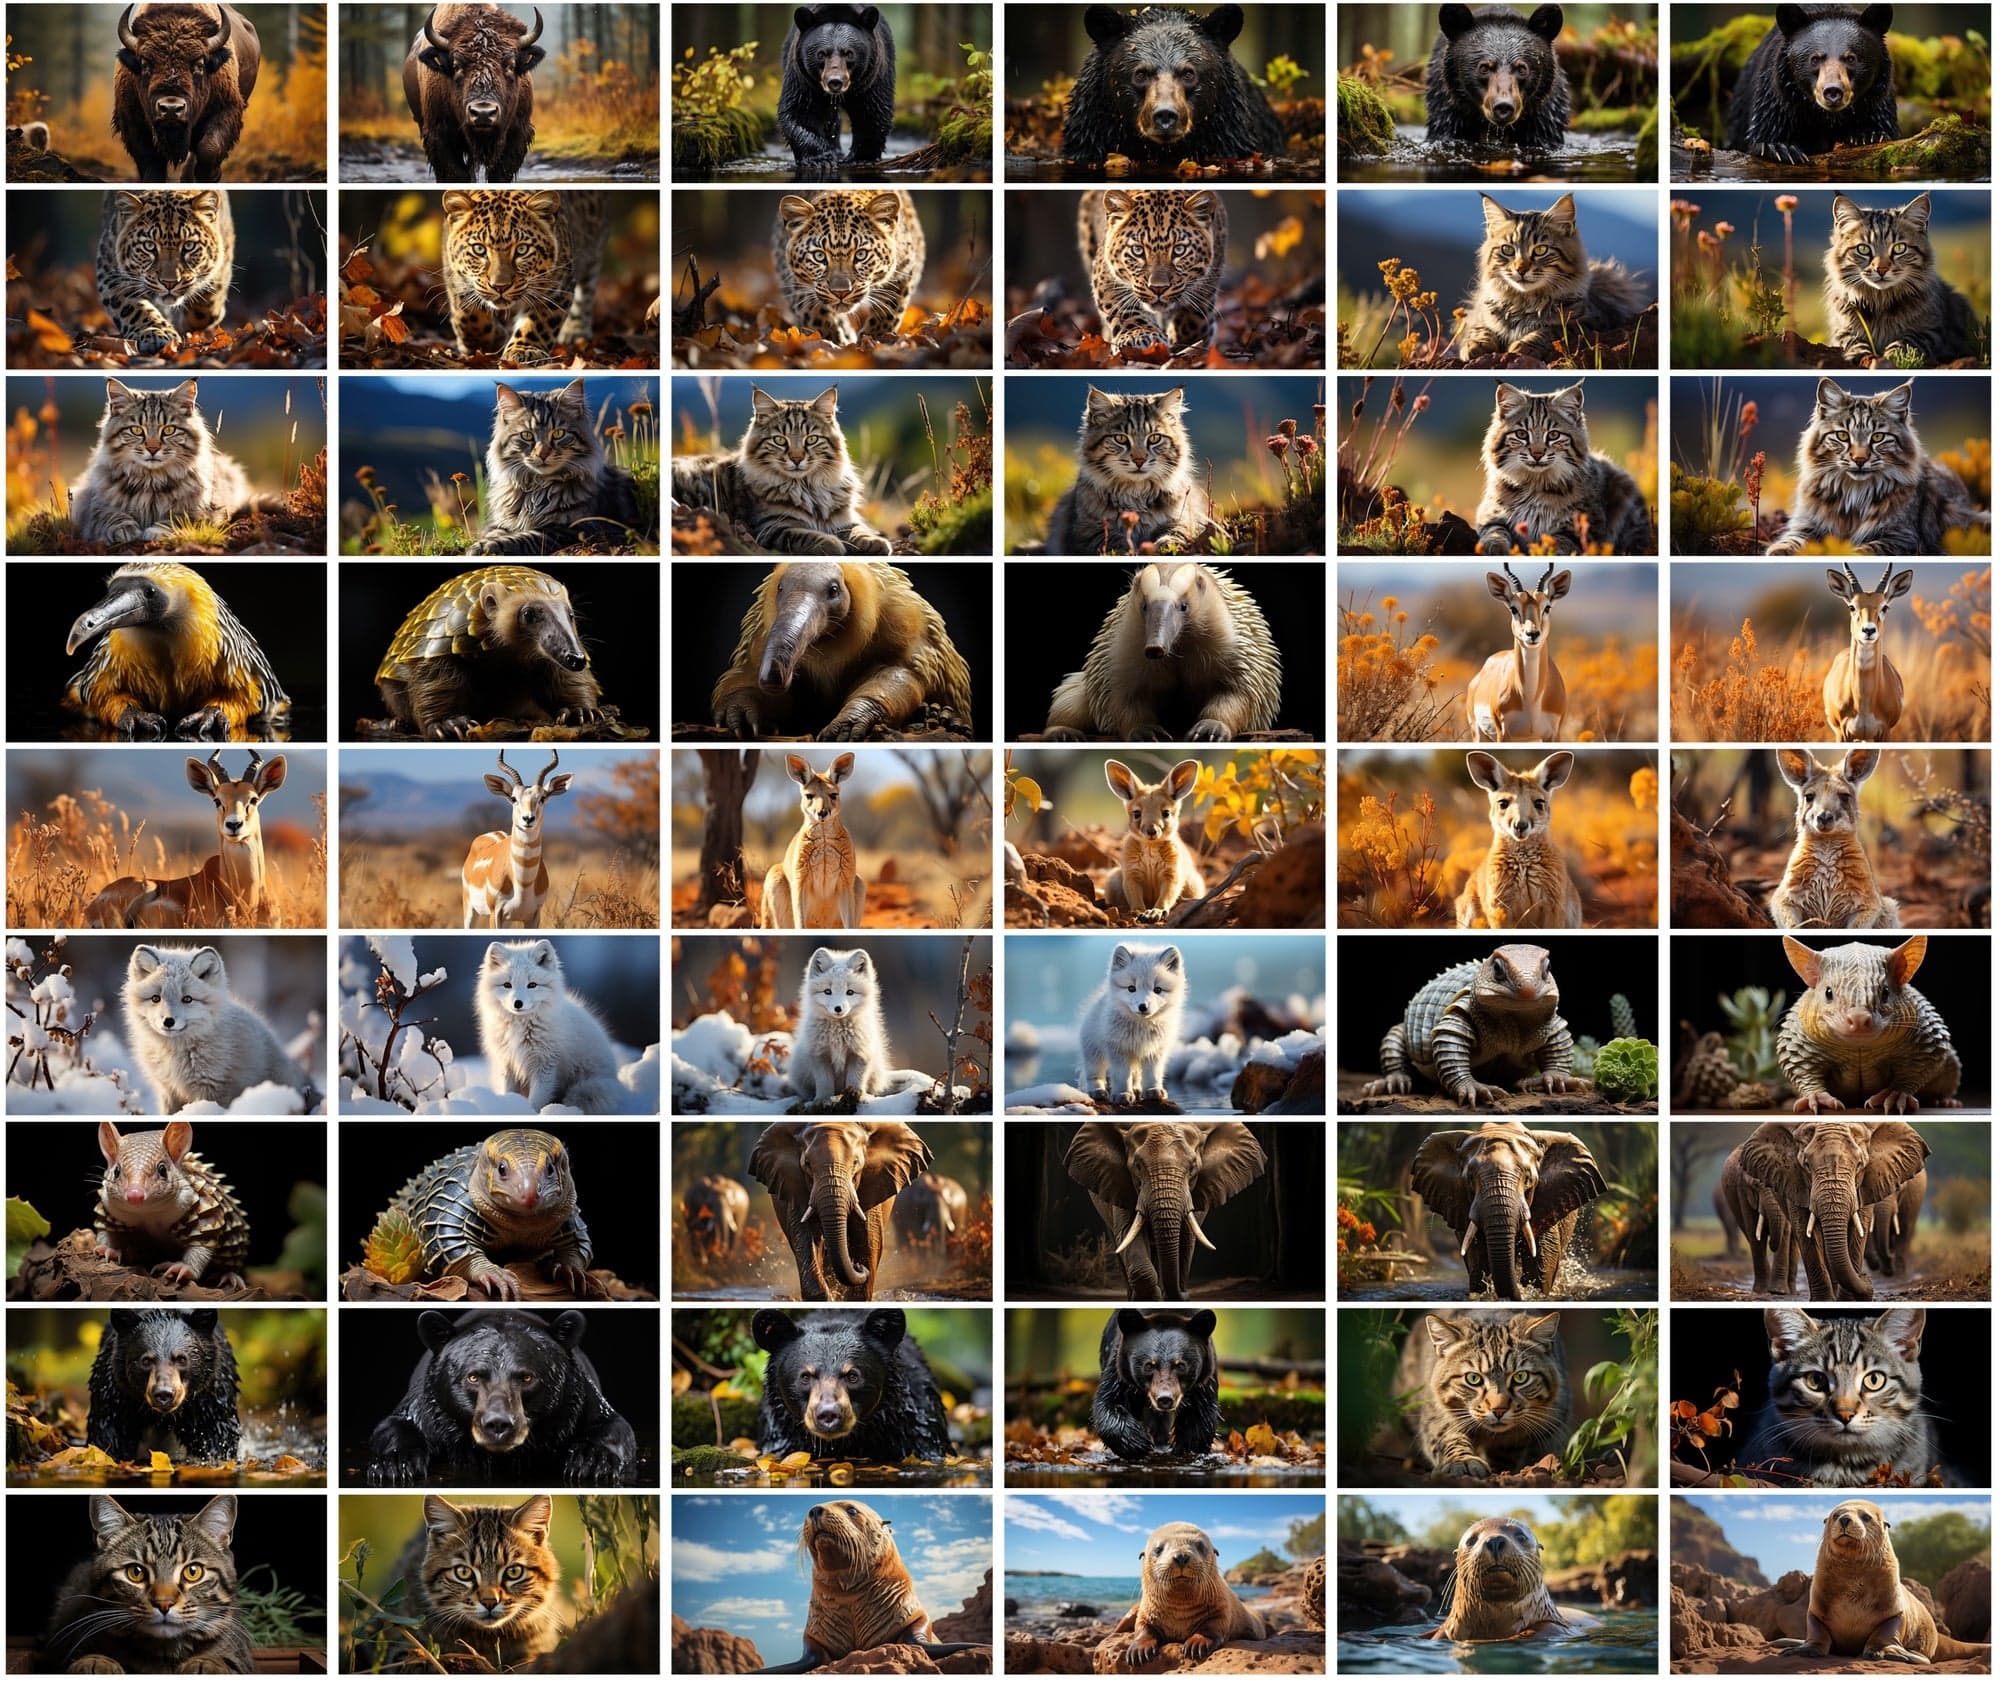 Mammal Animal Photography: 2250 High-Resolution Commercial License Images Digital Download Sumobundle